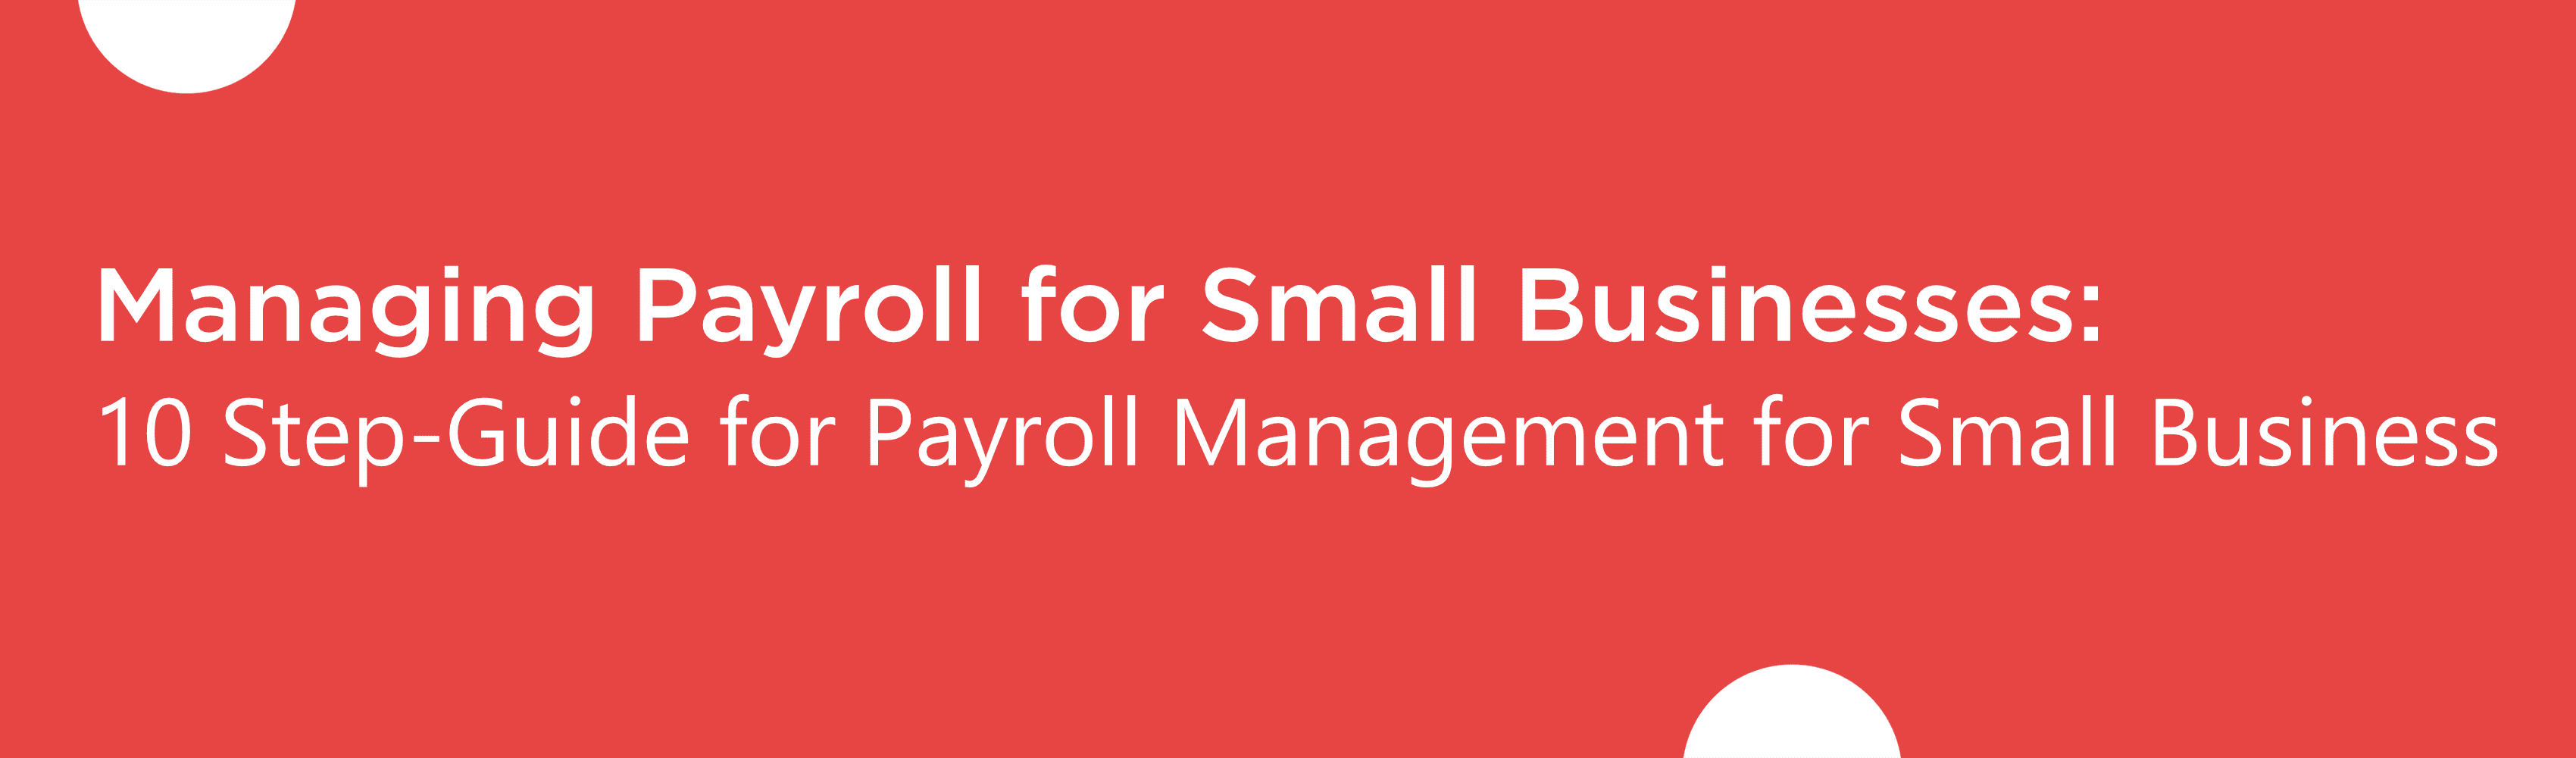 Managing Payroll for Small Businesses: A 10 Step-Guide for Payroll Management for Small Business